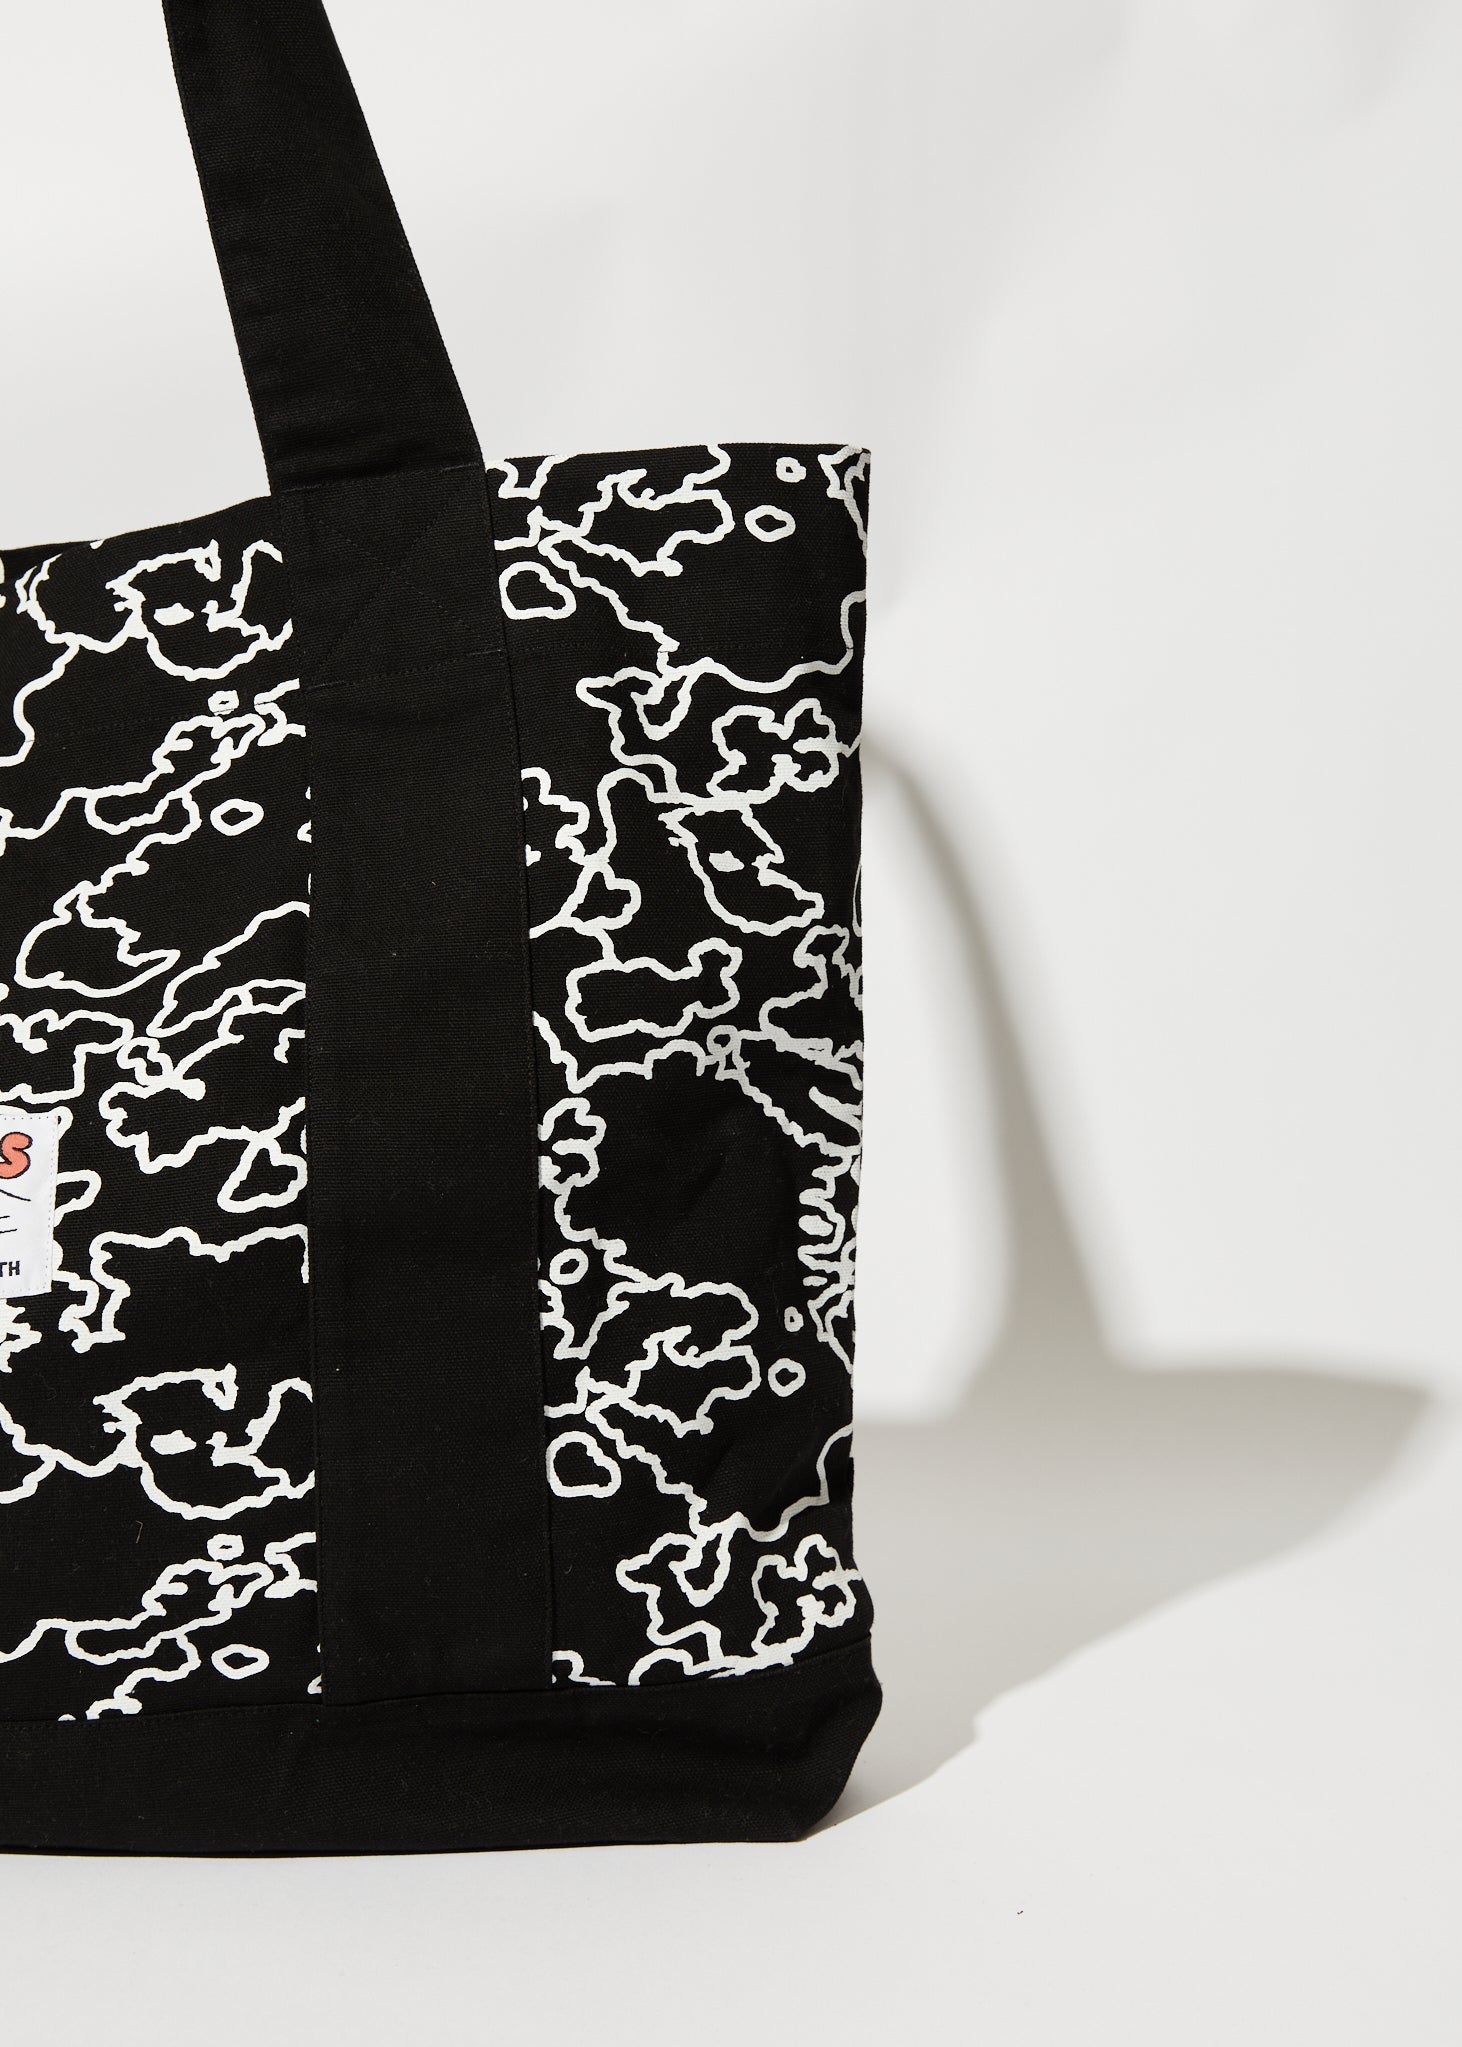 Afends Unisex Script - Recycled Oversized Tote Bag - Black Camo 